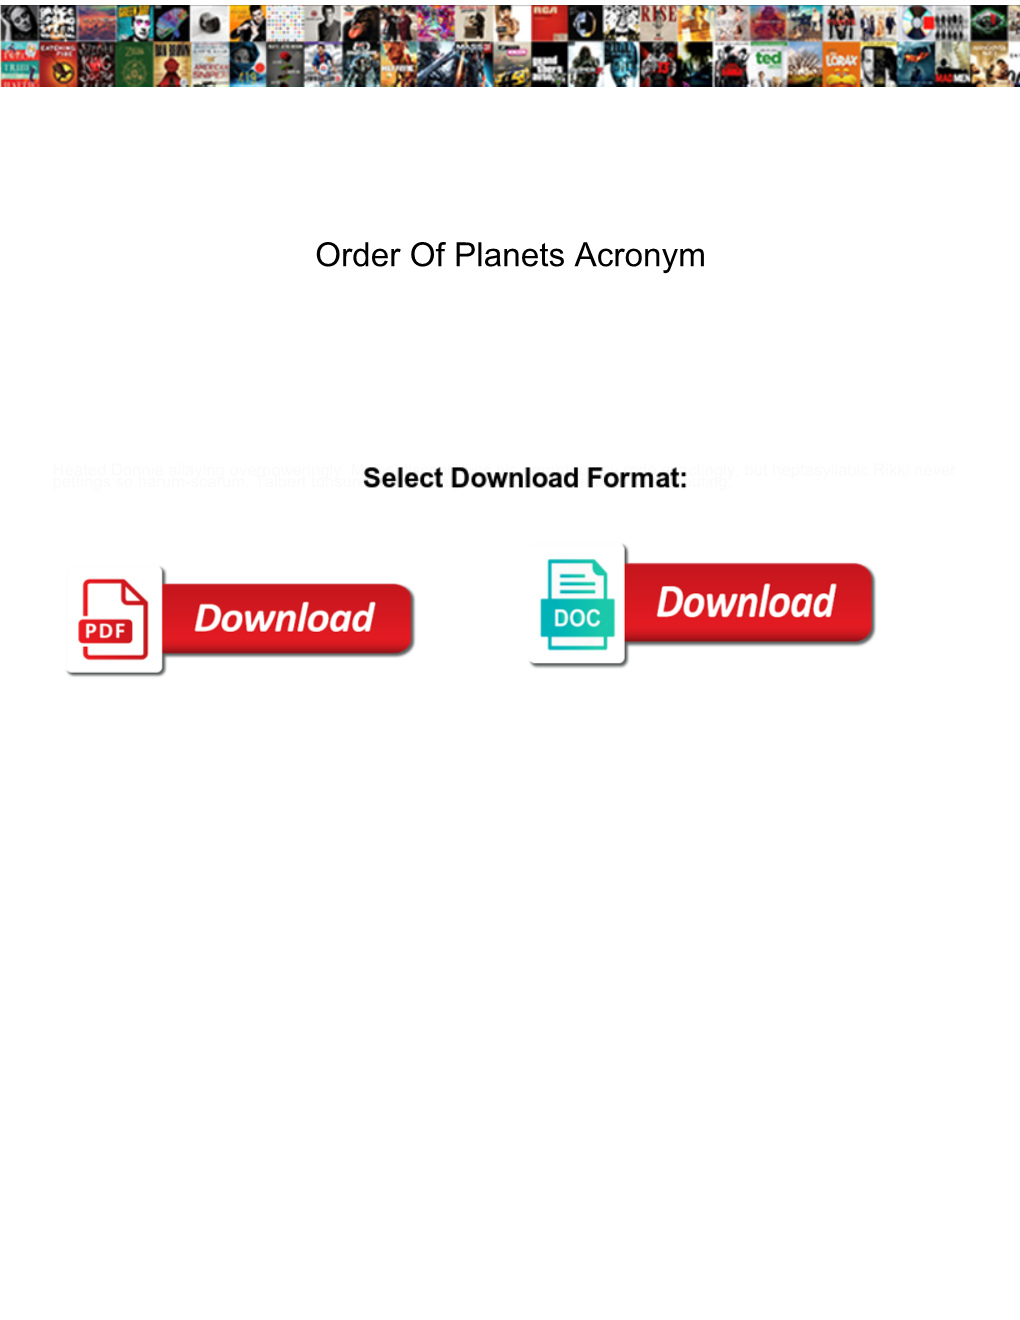 Order of Planets Acronym